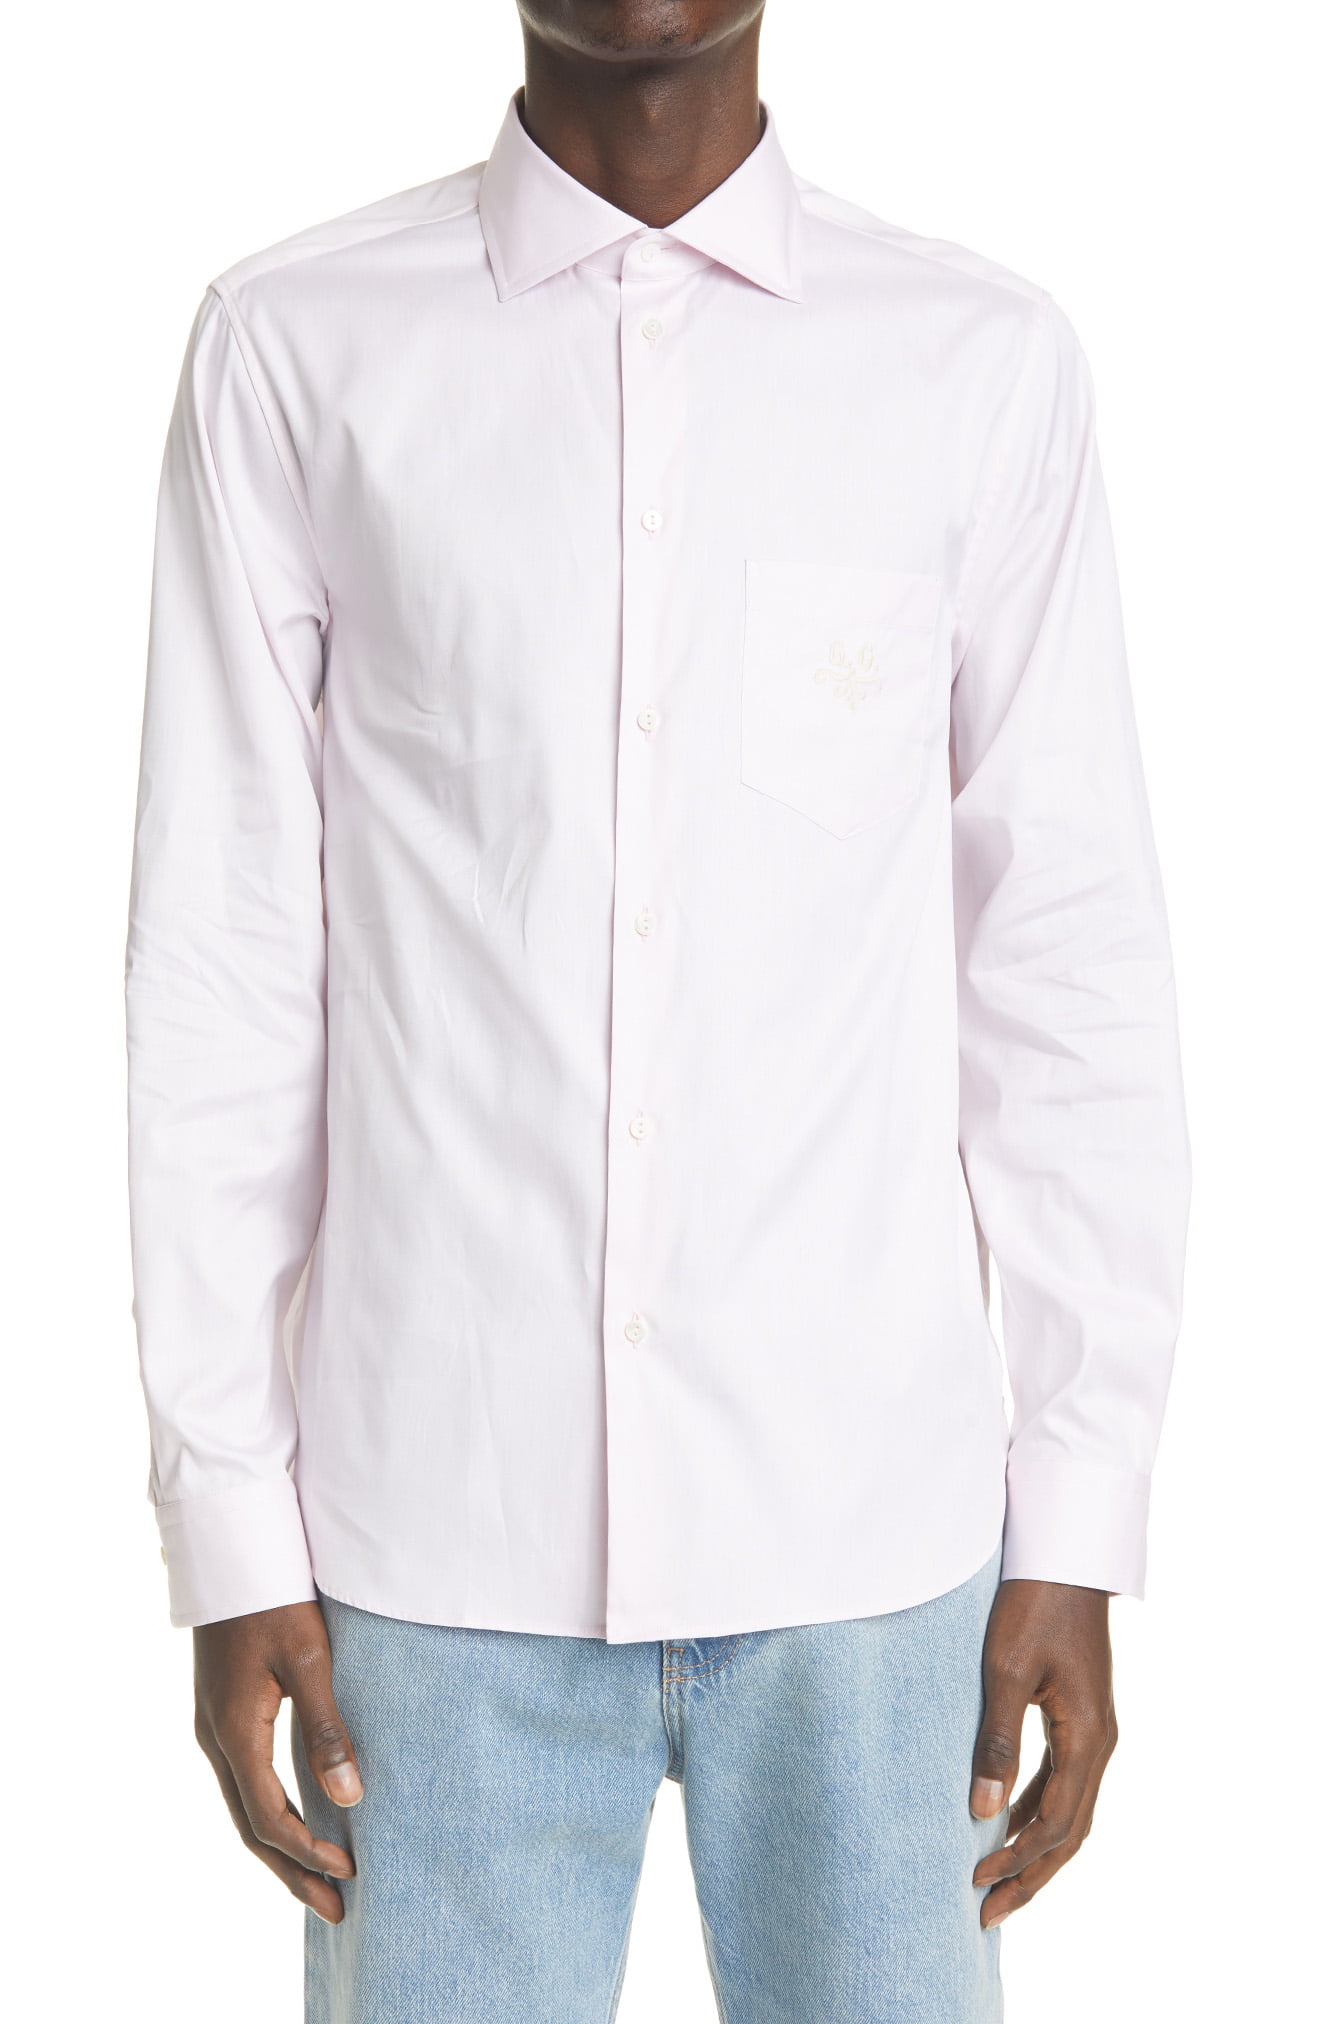 mens gucci button up